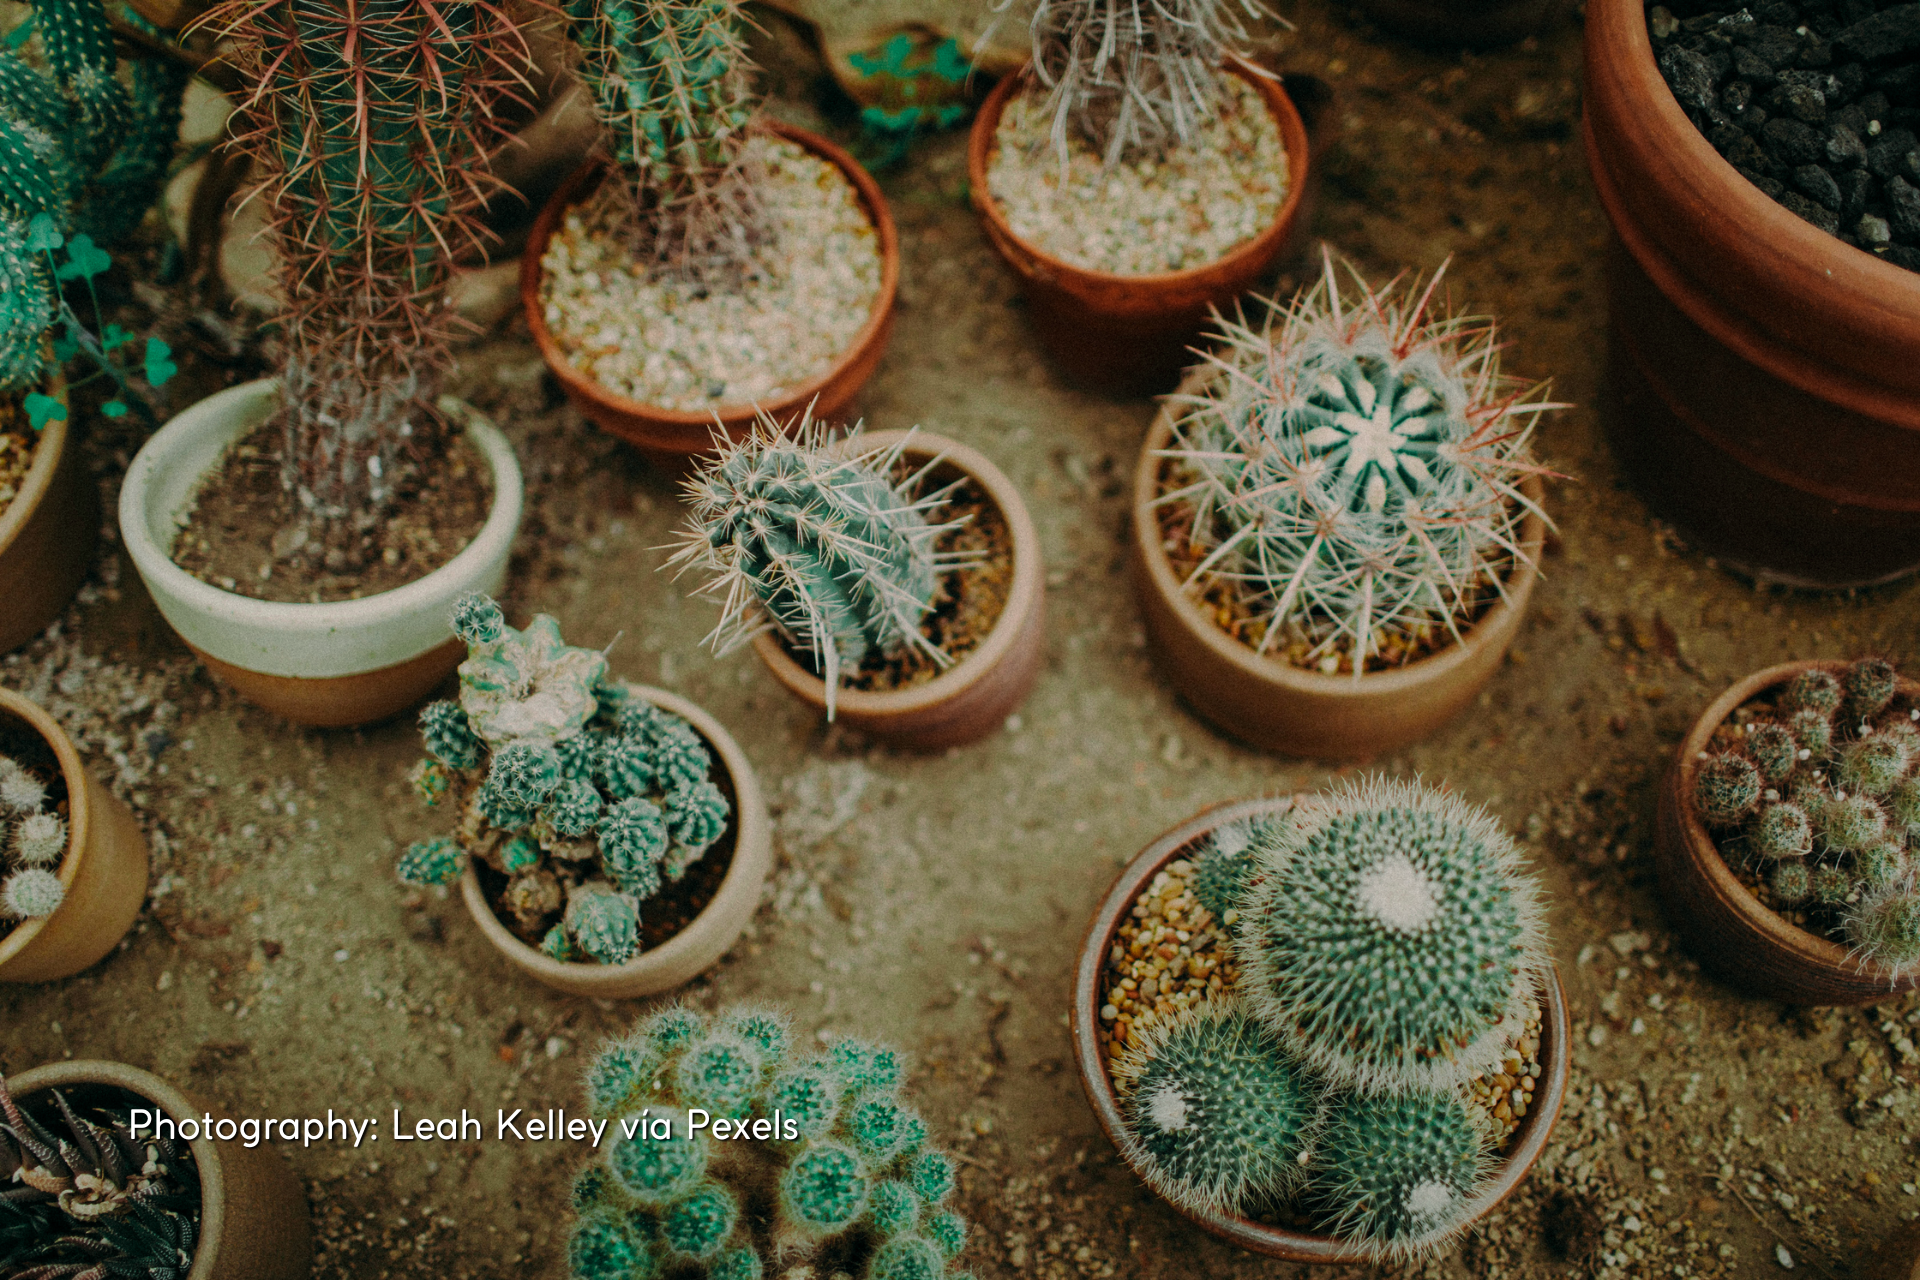 Why must cacti be your first plant?